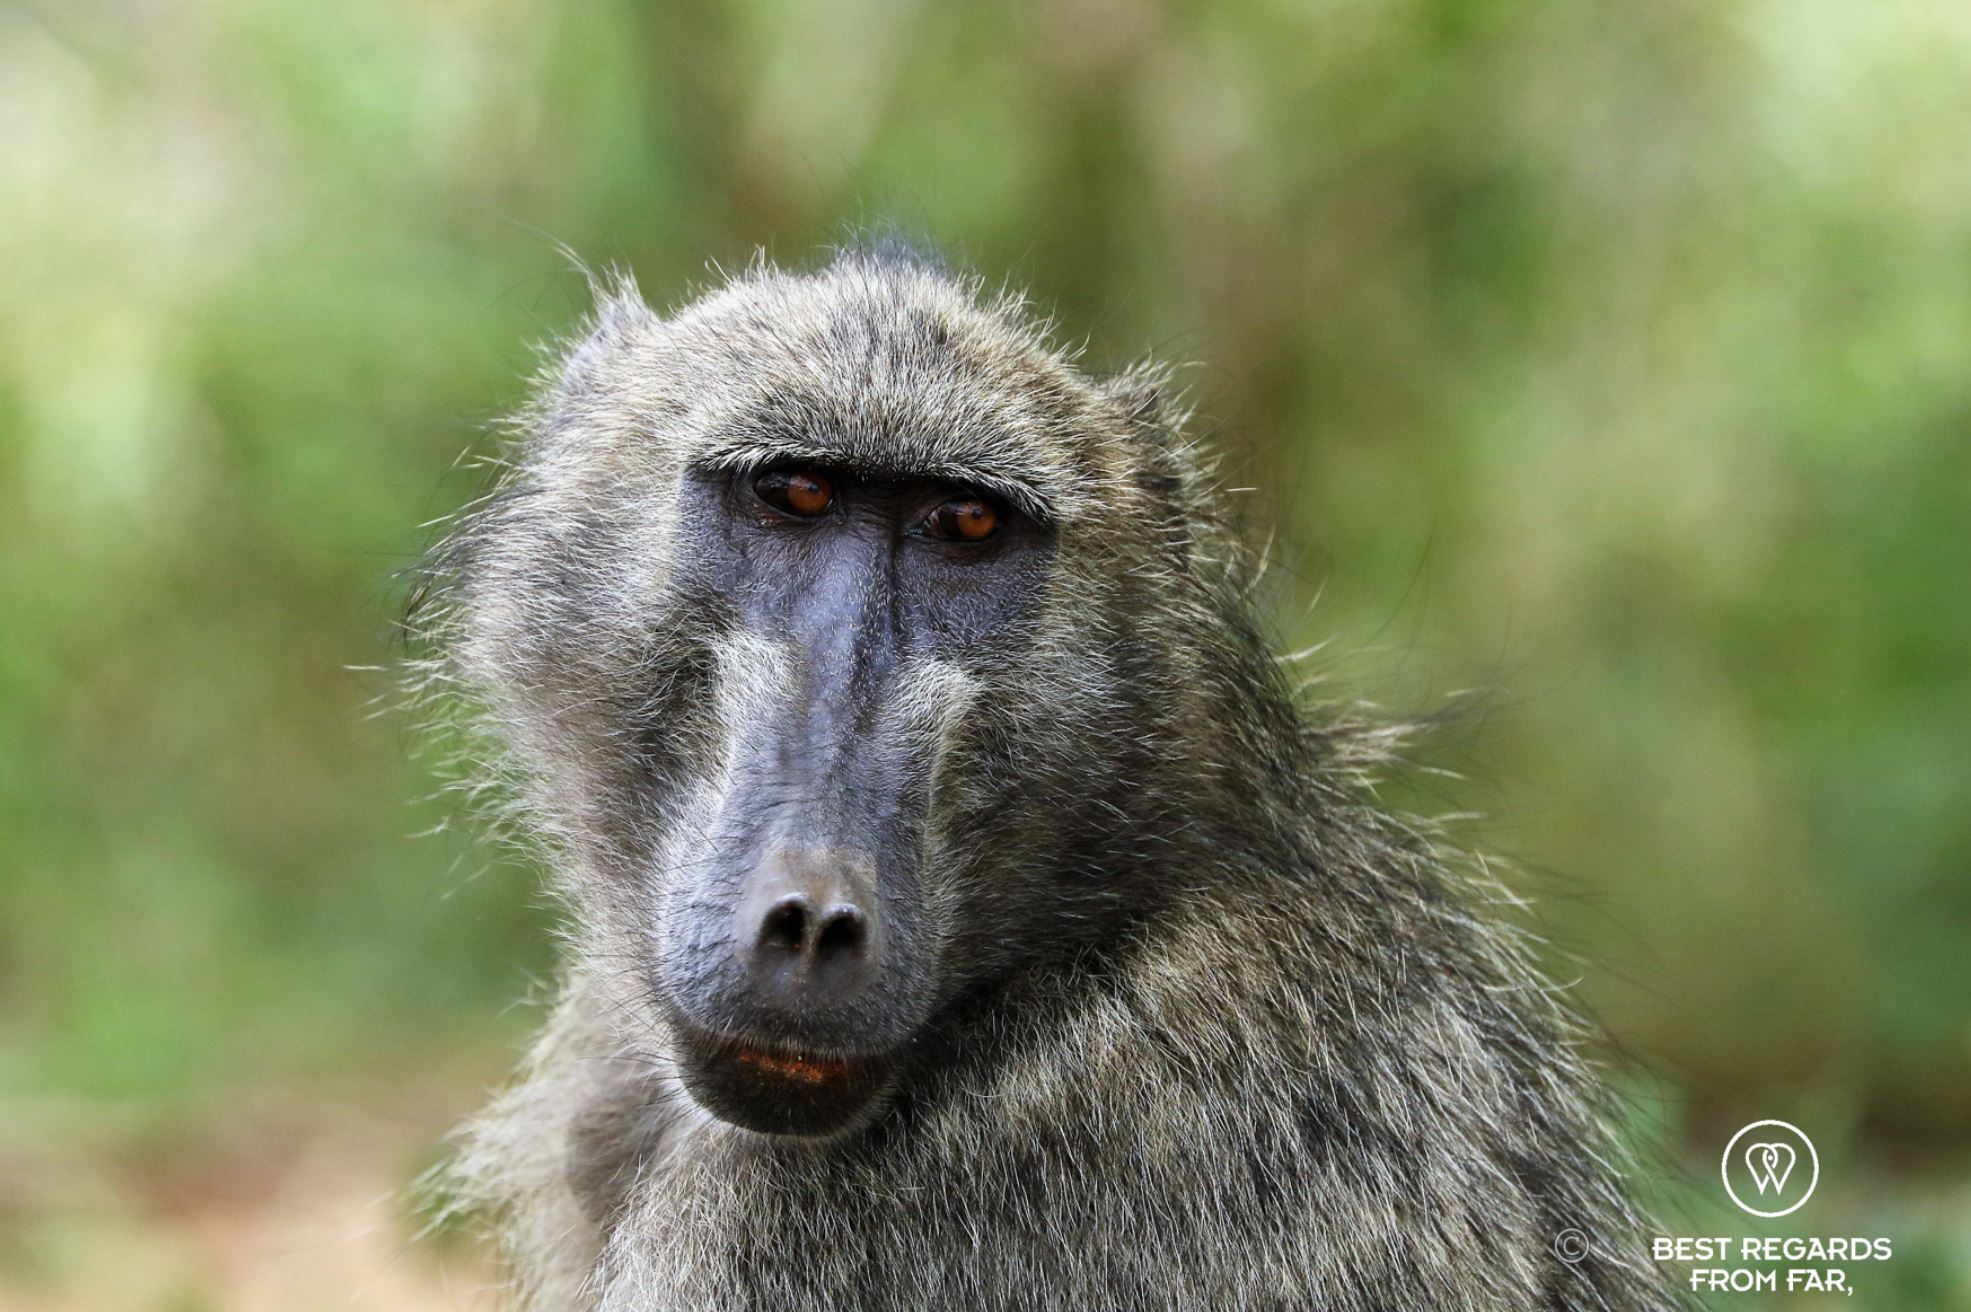 Portrait of a baboon in the wild with a green background, Kruger NP, South Africa.